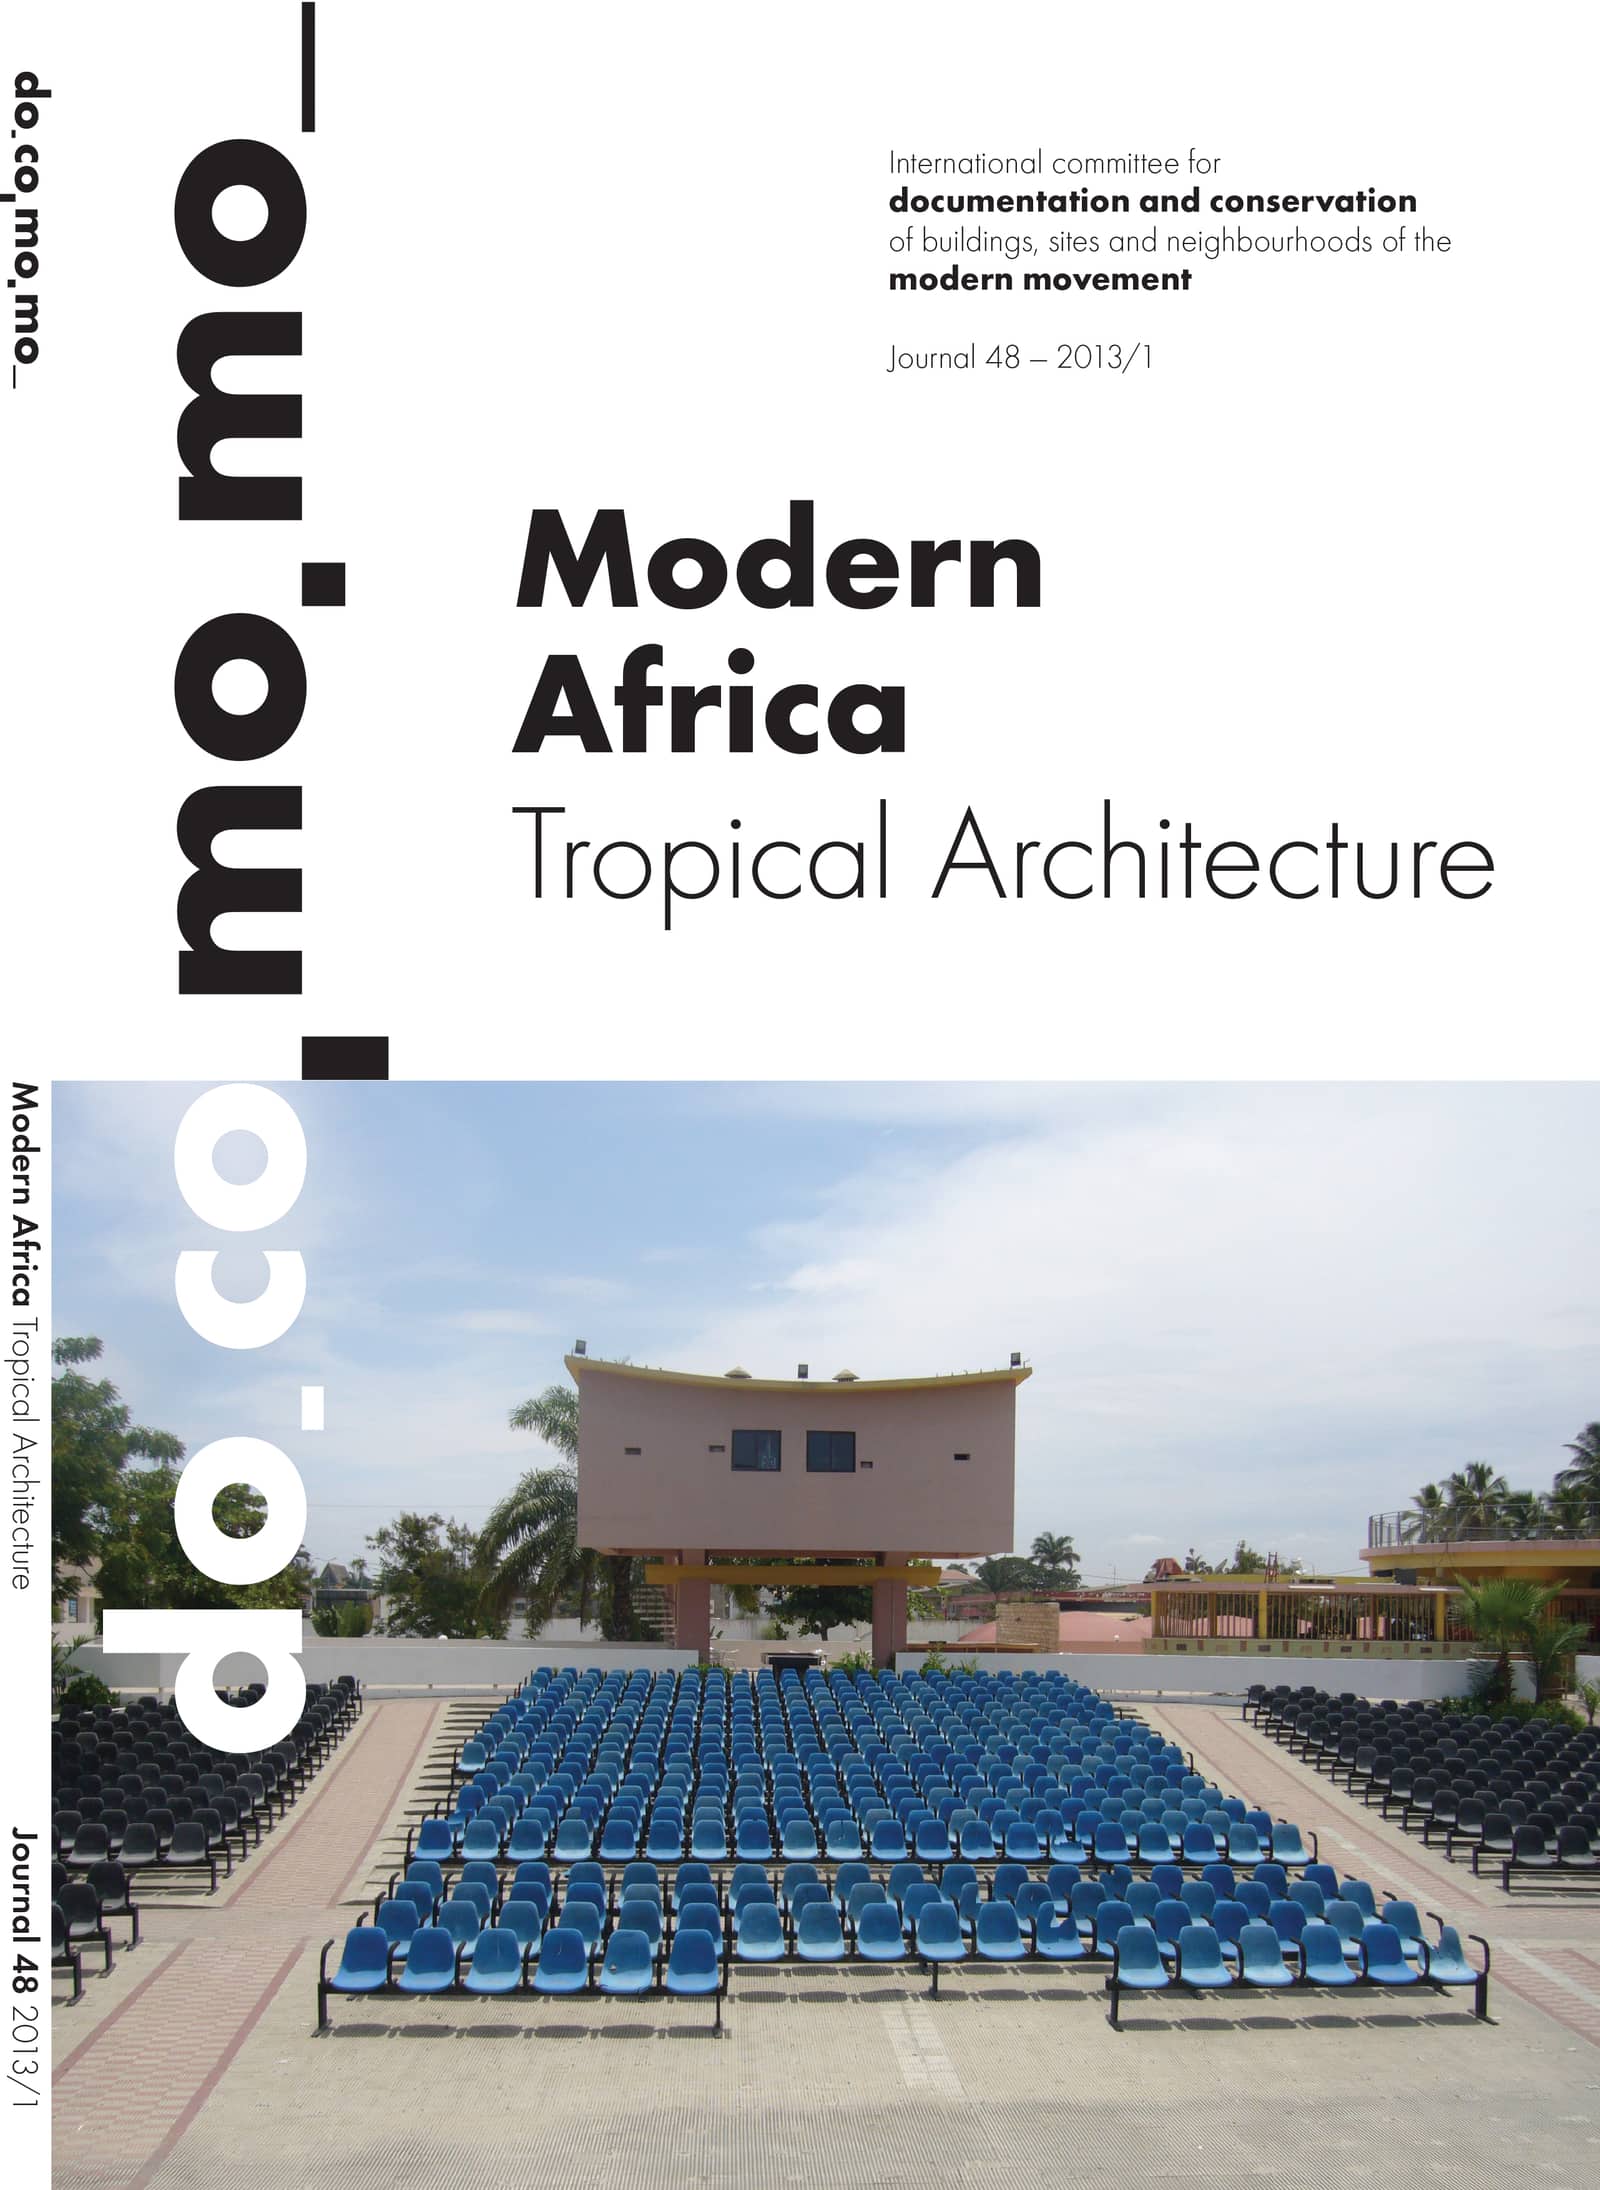 						View No. 48 (2013): Modern Africa, Tropical Architecture
					